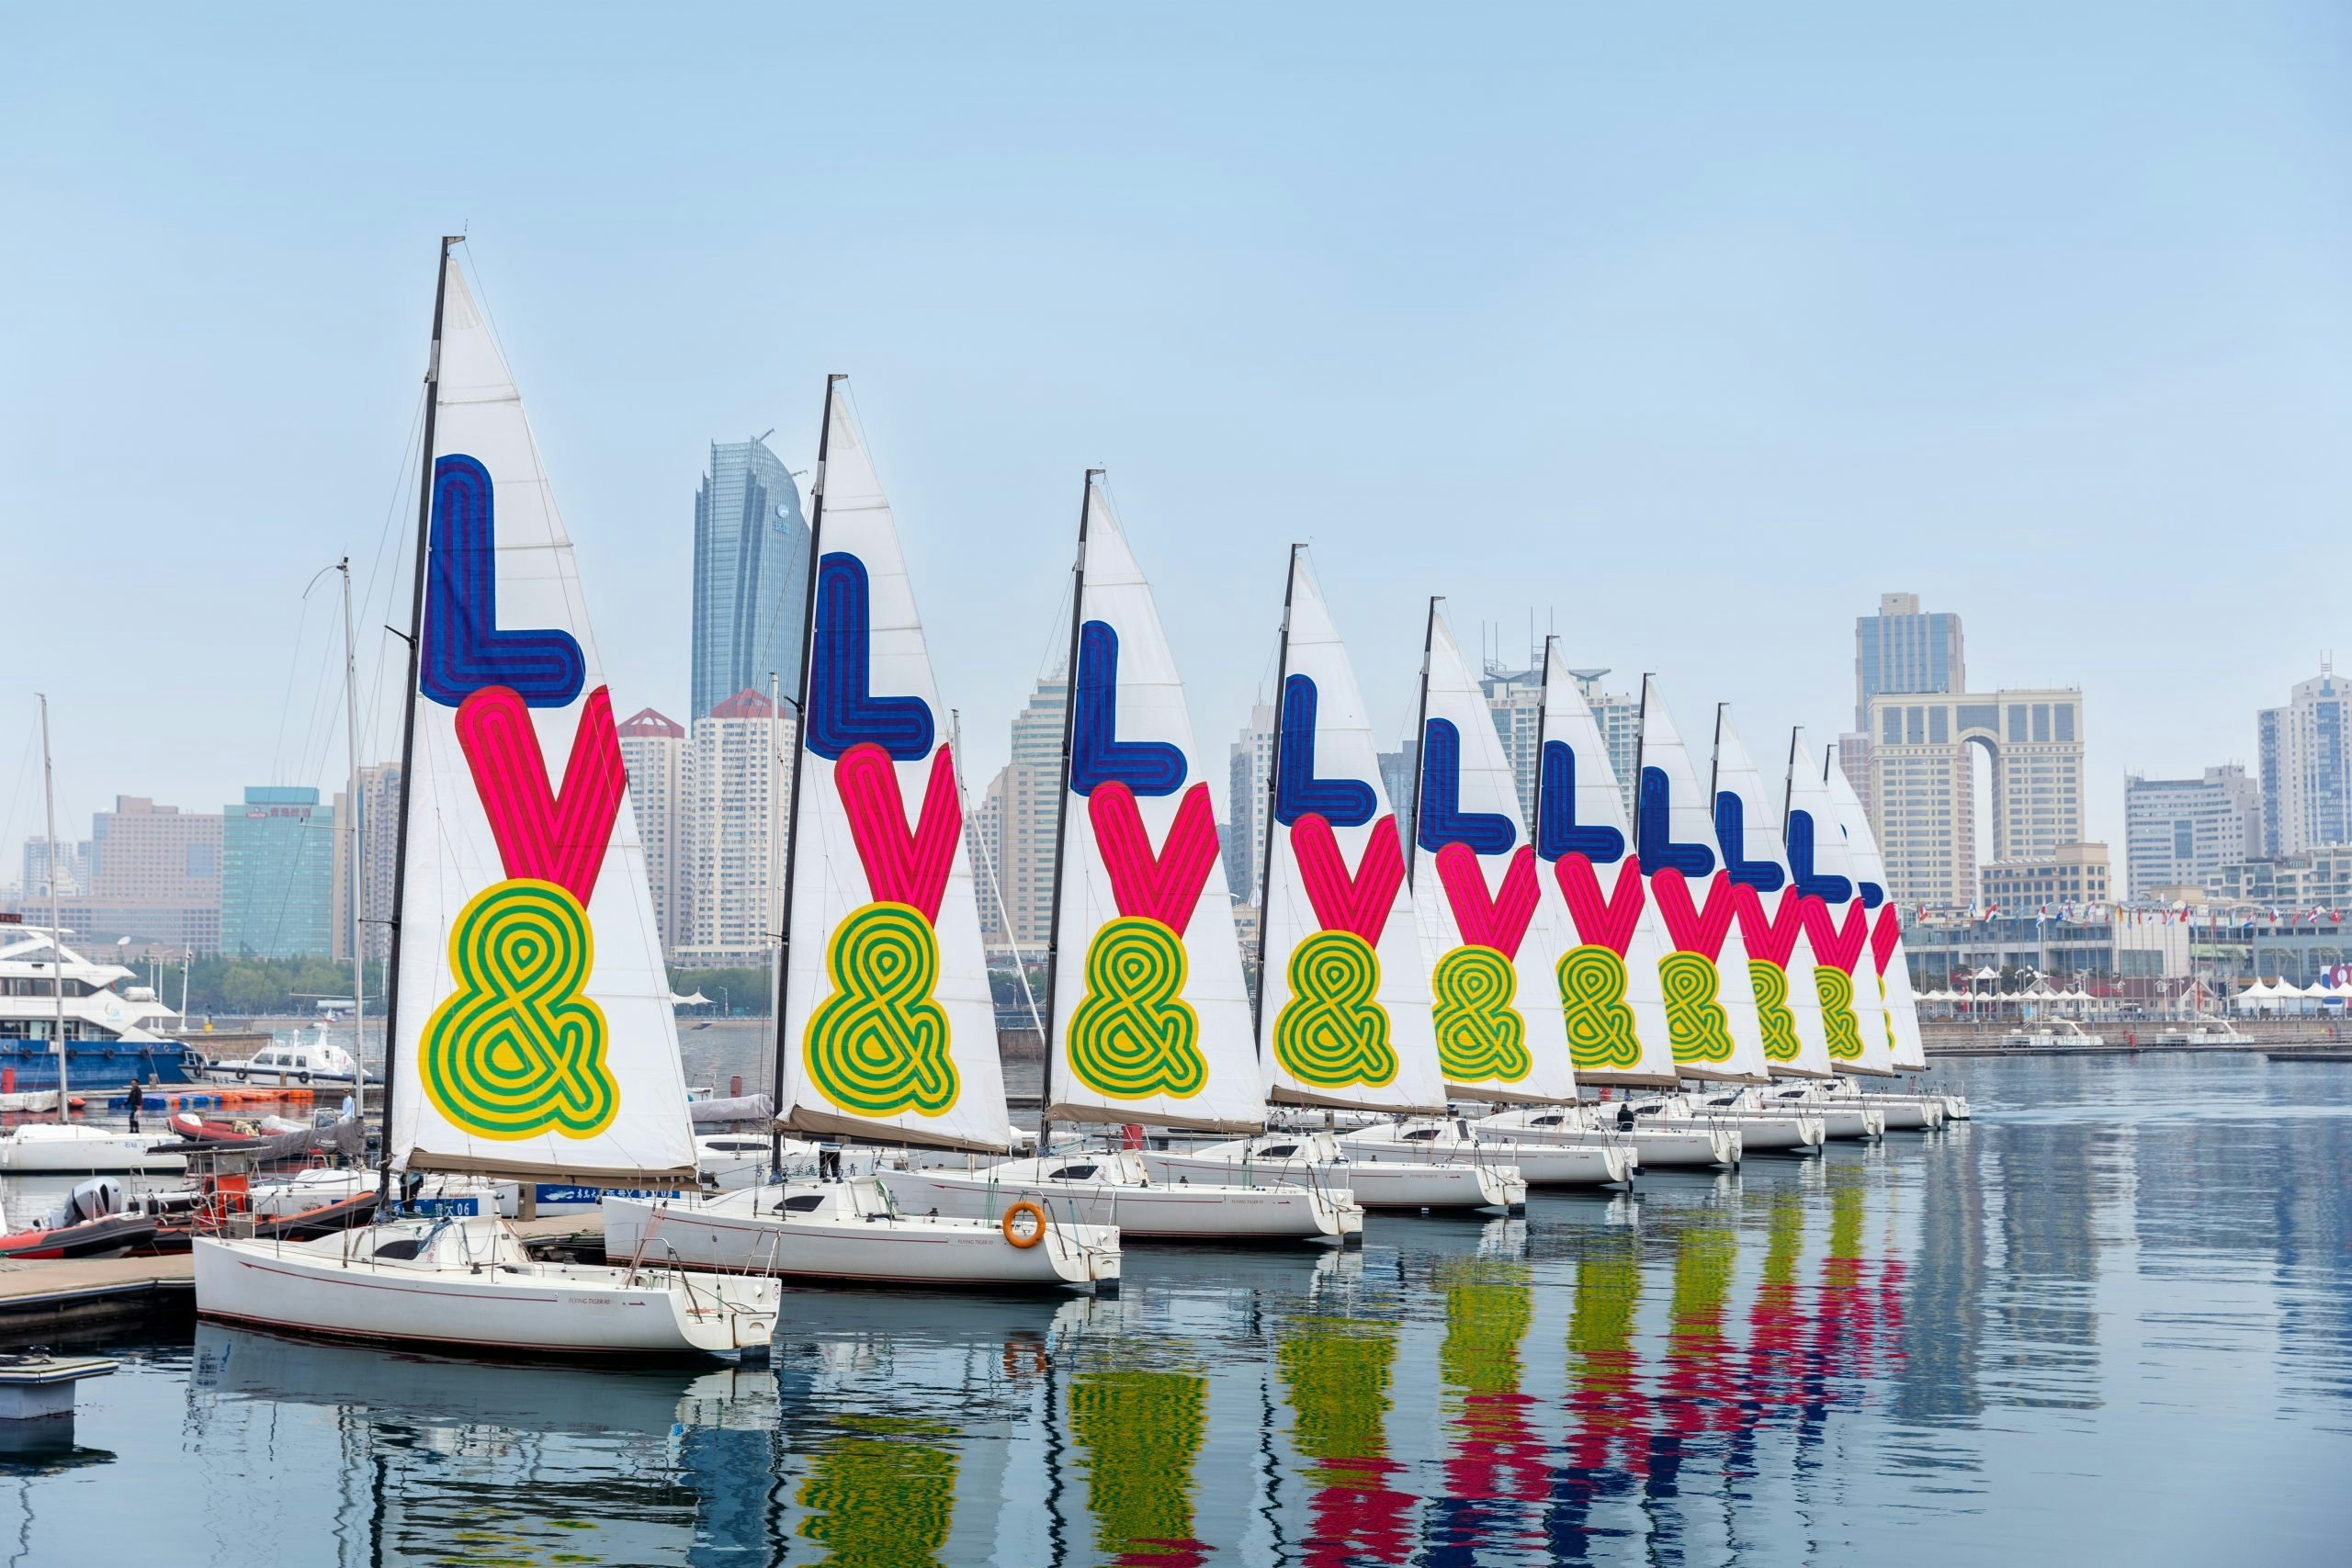 Louis Vuitton has mounted a variety of outdoor advertising on sailing boats to announce the opening of the Louis Vuitton& exhibition in Qingdao. Photo: Courtesy of Louis Vuitton